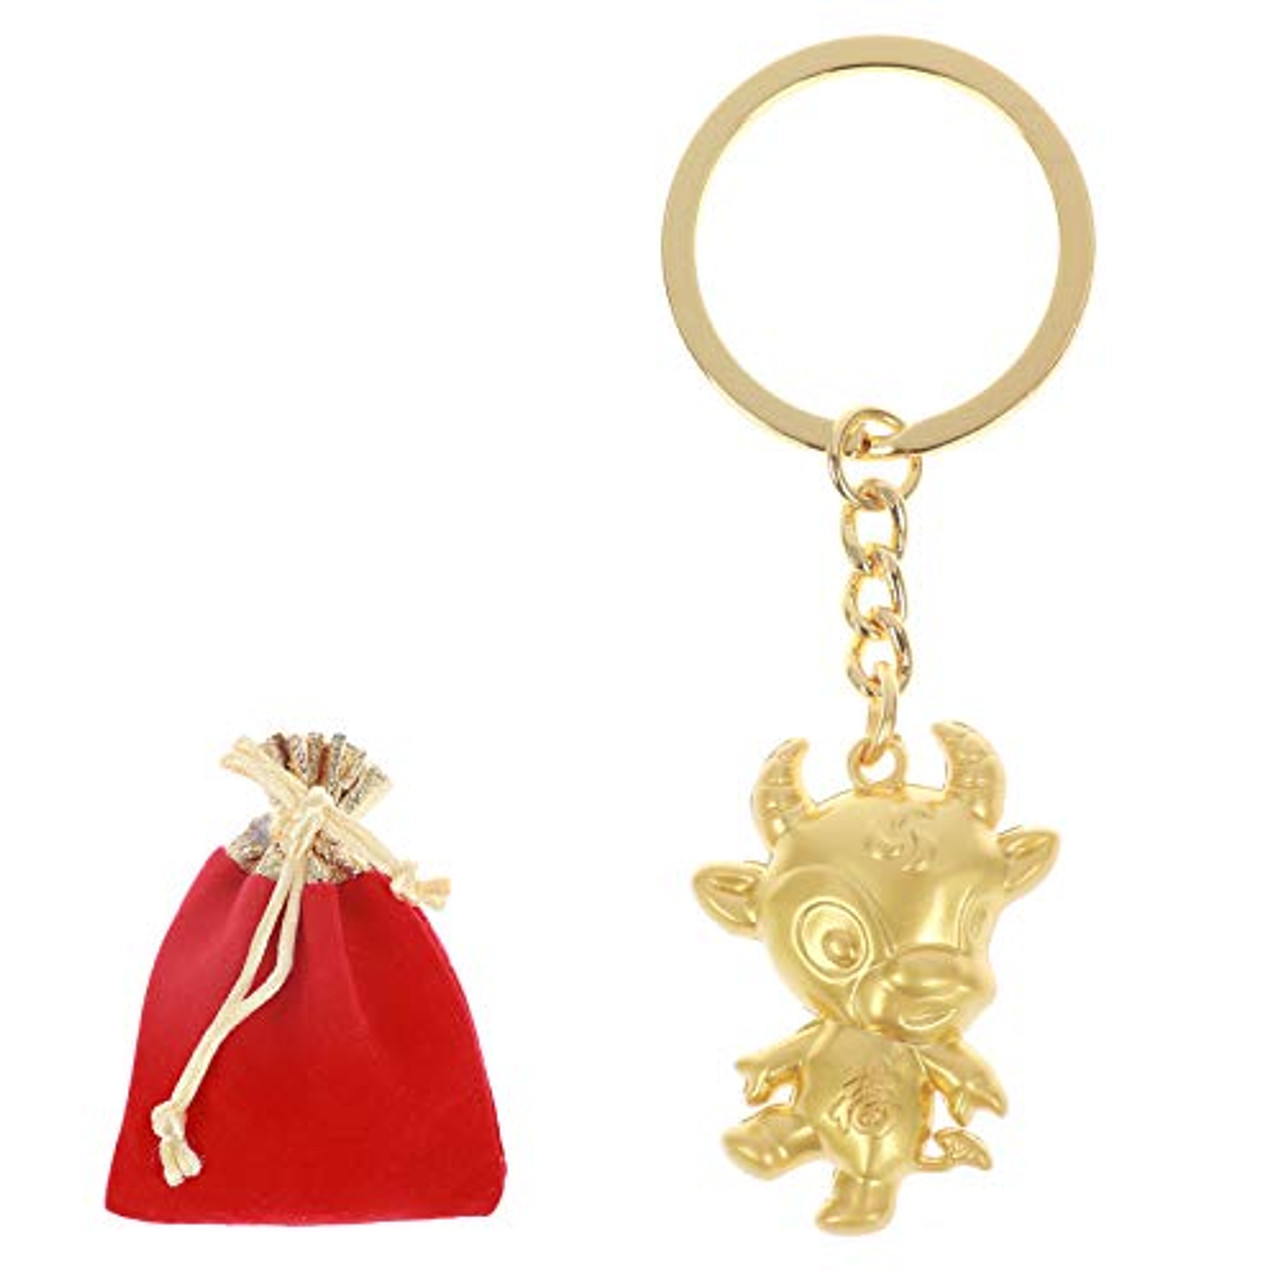 Mascot Cow Key Ring 2021 New Year Ox Lucky Keychain Alloy Cow Key Ring Pendants 